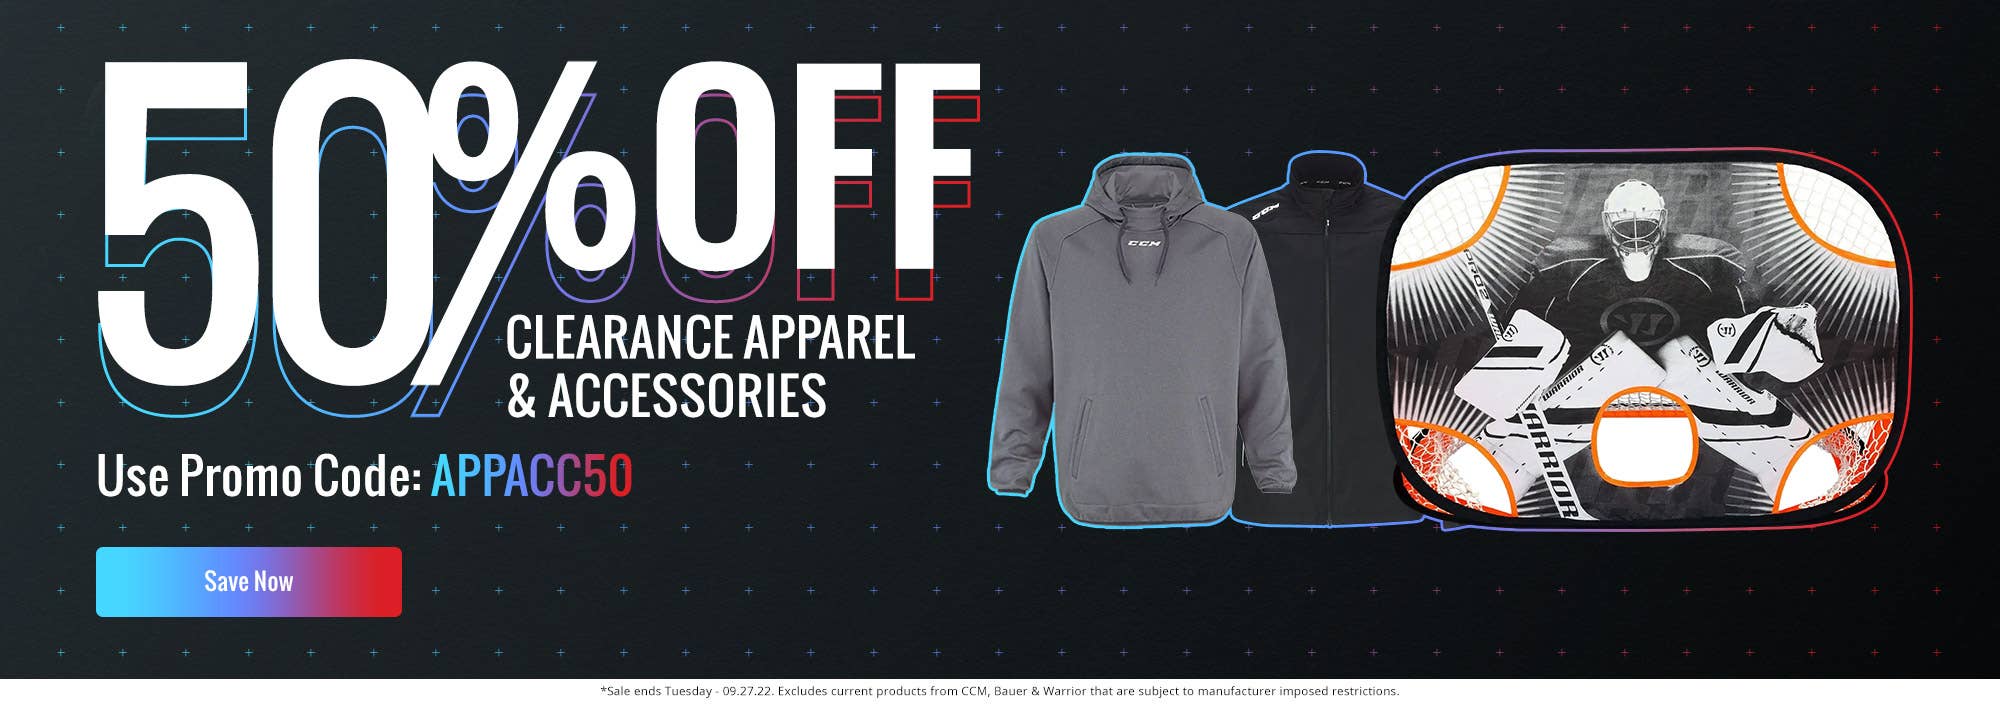 Apparel & Accessories Sale: Save An Extra 50%